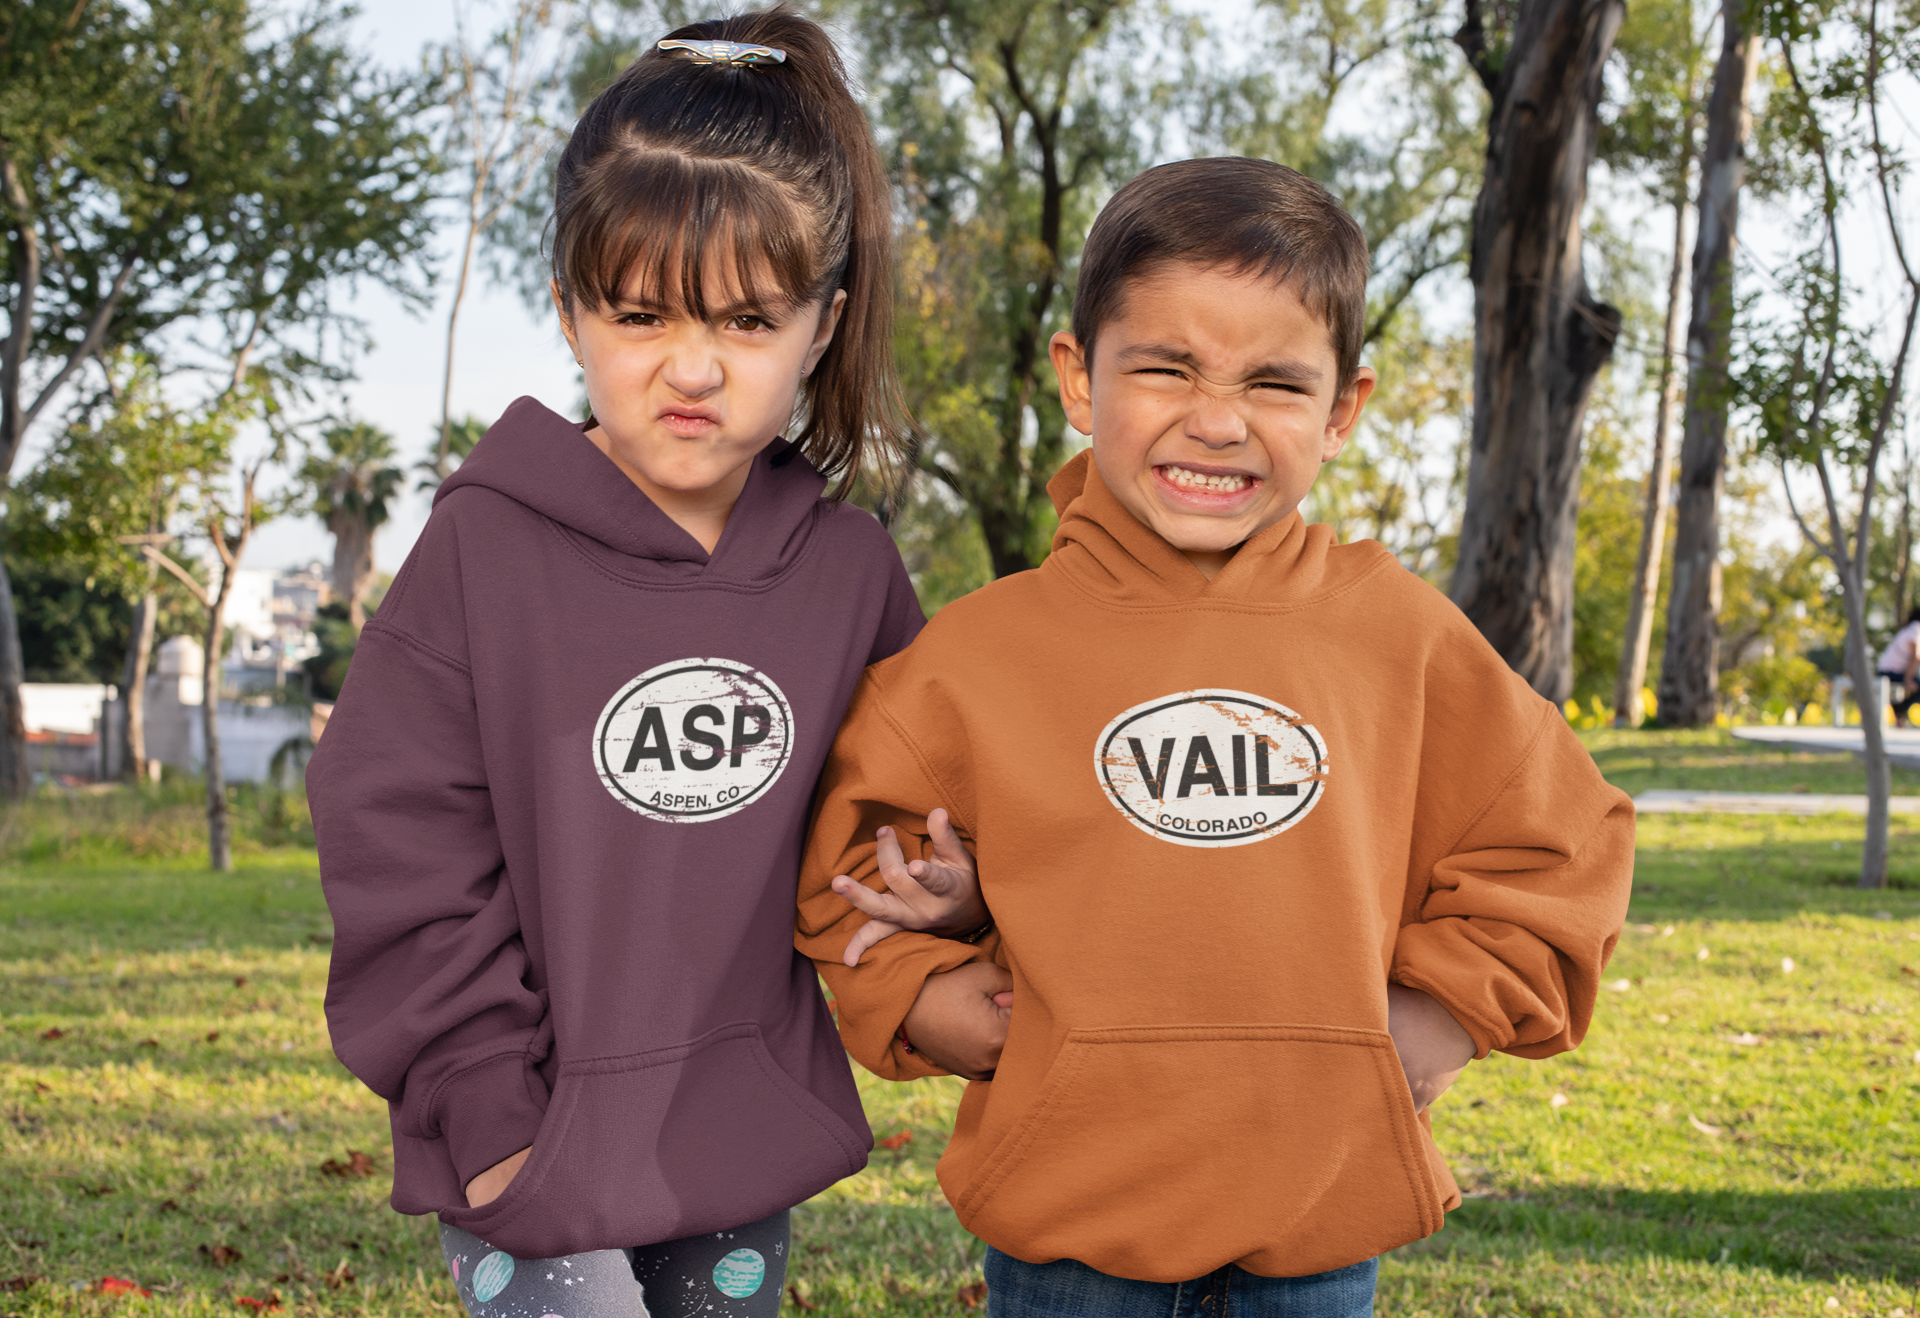 Vail Youth Hoodie | Classic Oval Logo Youth Hoodie Souvenir Gift - My Destination Location